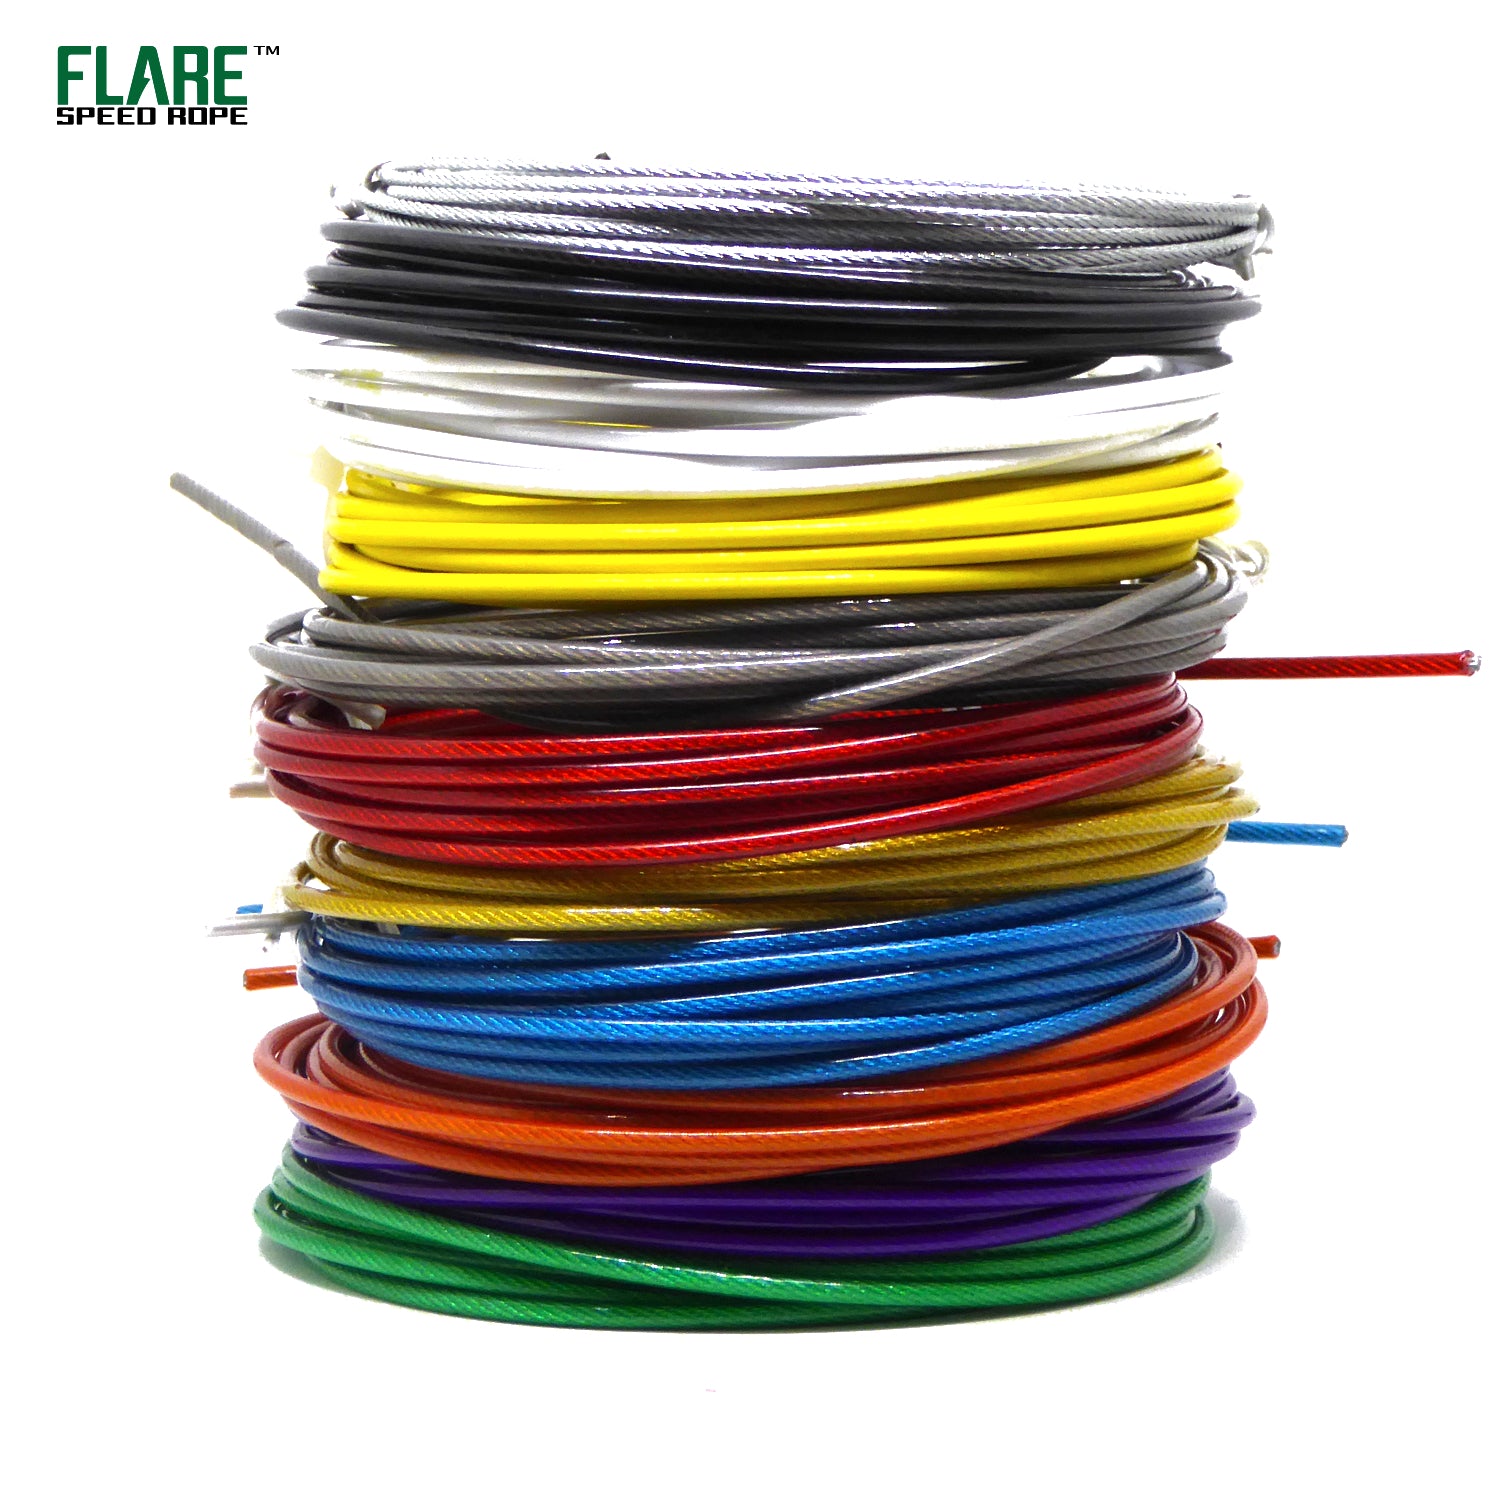 Flare replacement speed rope cables stack of cables